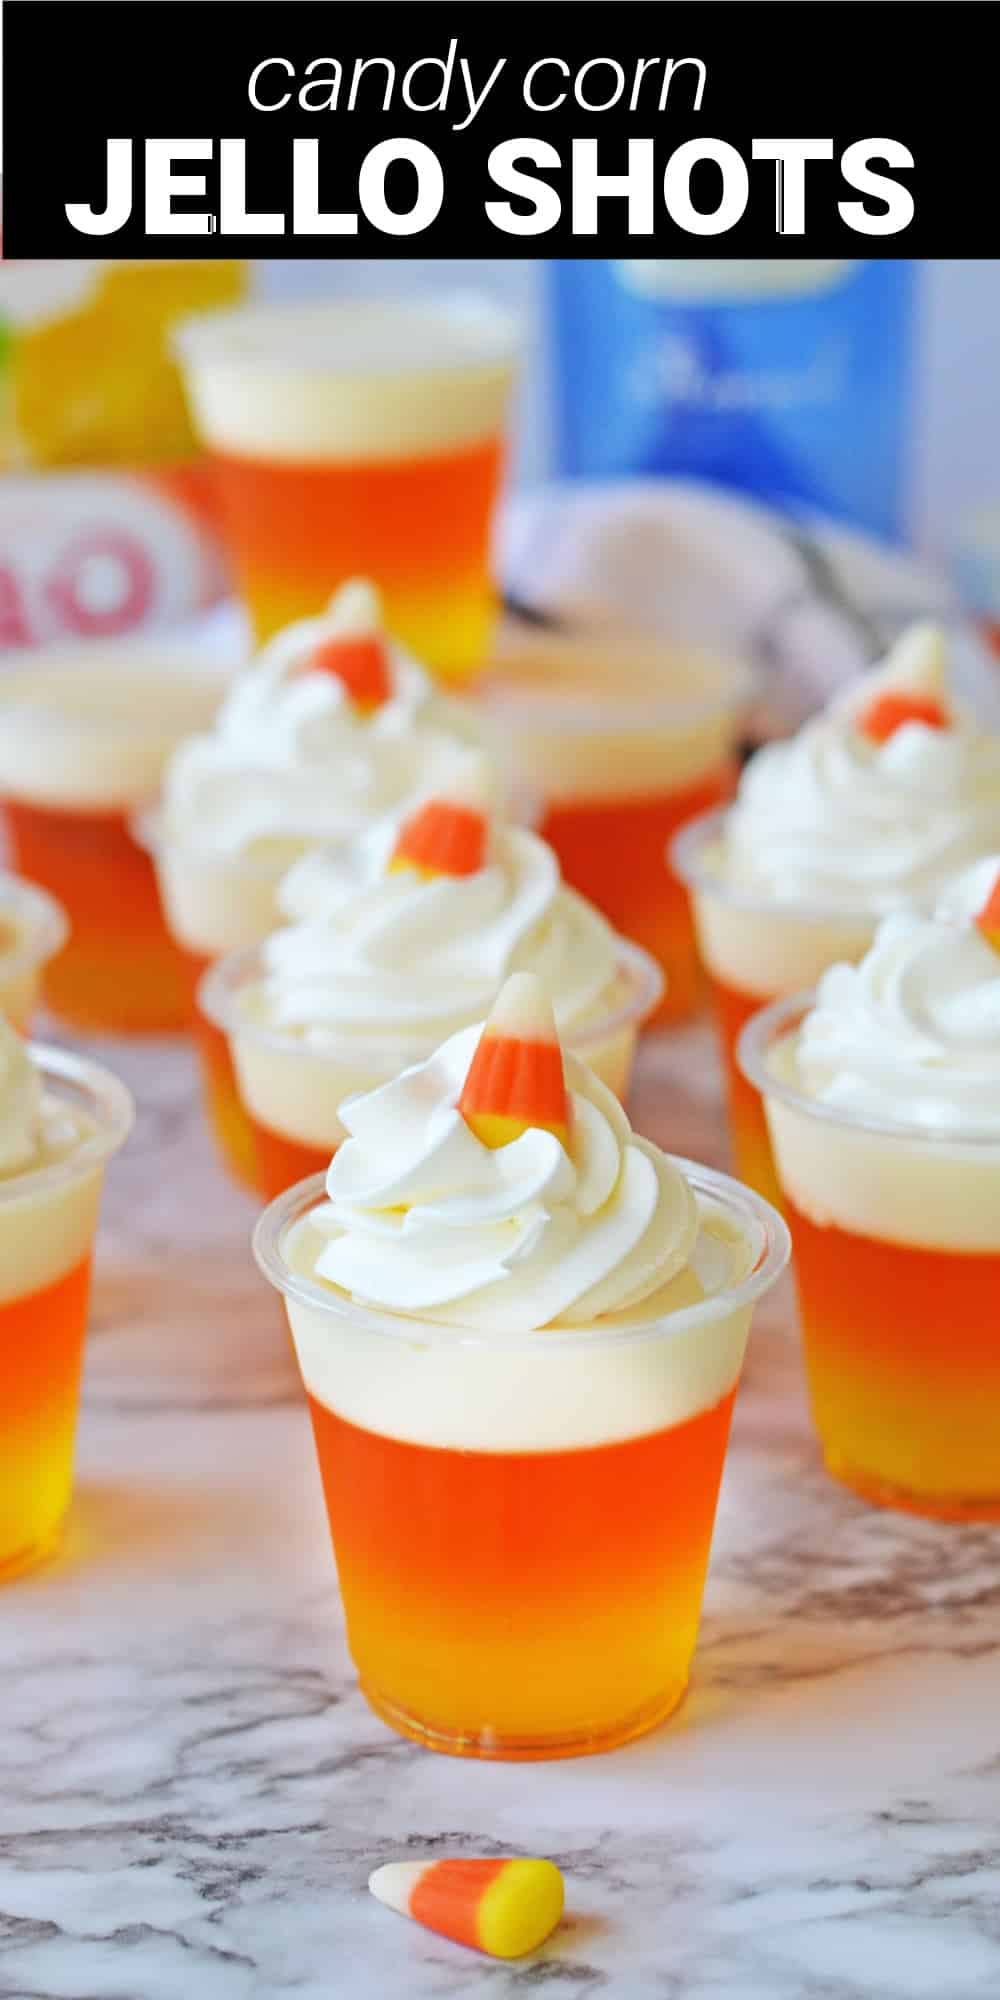 These Candy Corn Jello Shots are delicious and boozy treats with a fun and festive look. Gelatin layers in yellow, orange, and white make this shot resemble the candy corn treats that are so popular in the fall. They’re infused with whipped cream vodka, which adds a delicious and sweet whipped cream flavor to complement the fruity Jello. Then, they’re topped with fresh whipped cream and garnished with a candy corn for a cute finishing touch.